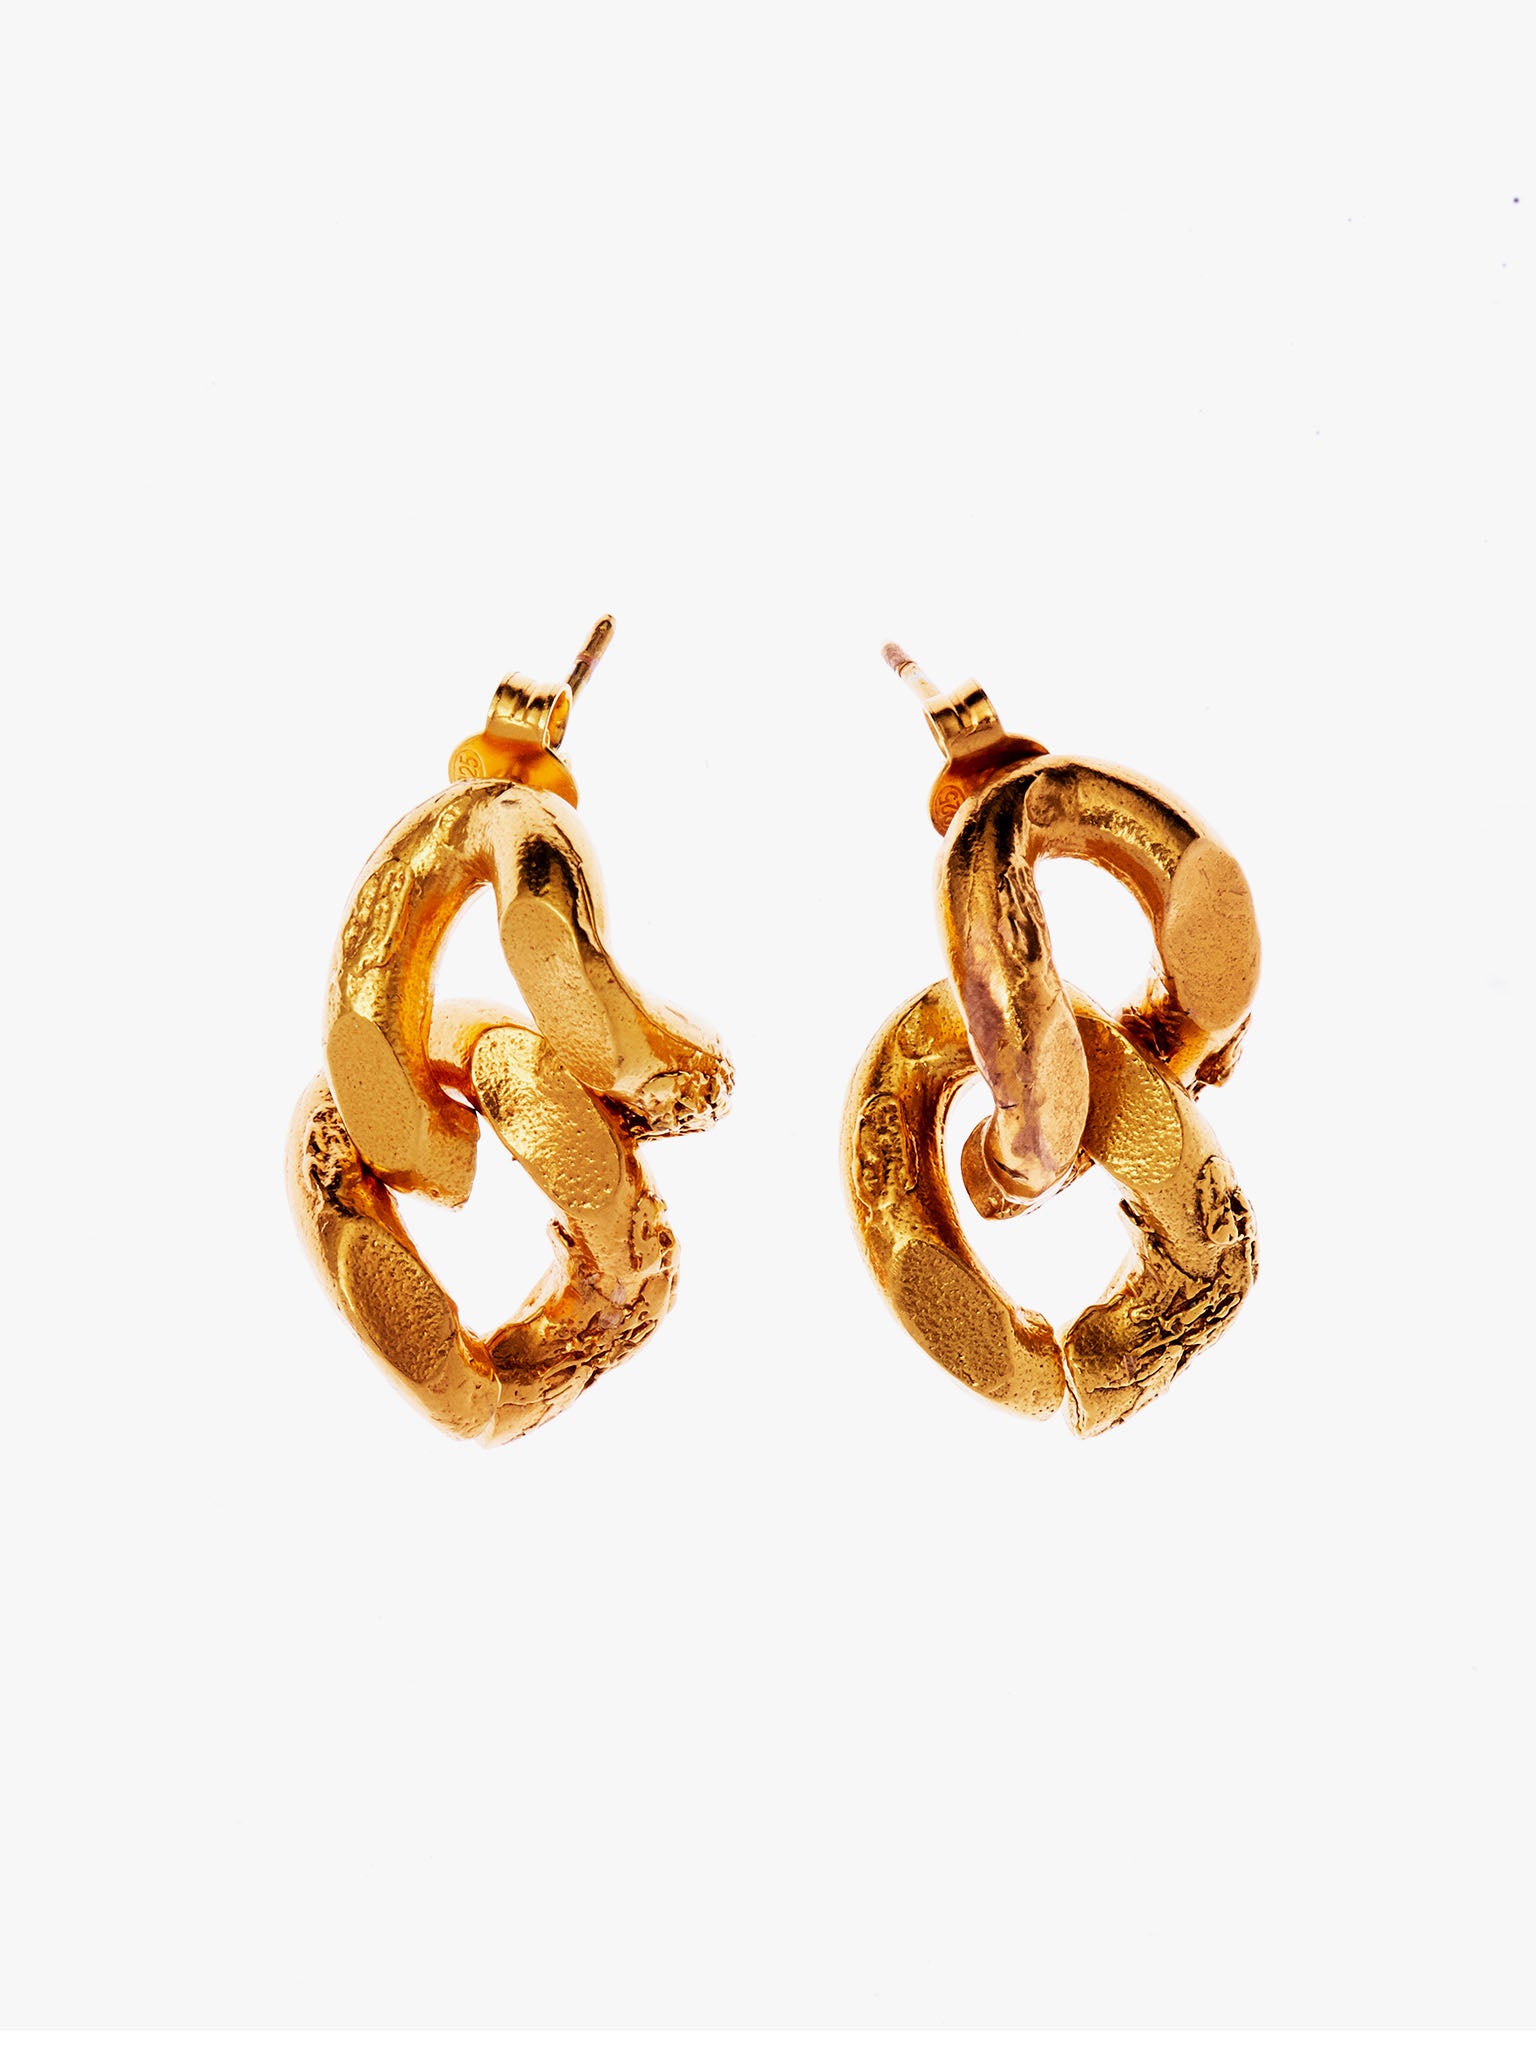 The fractured link earrings